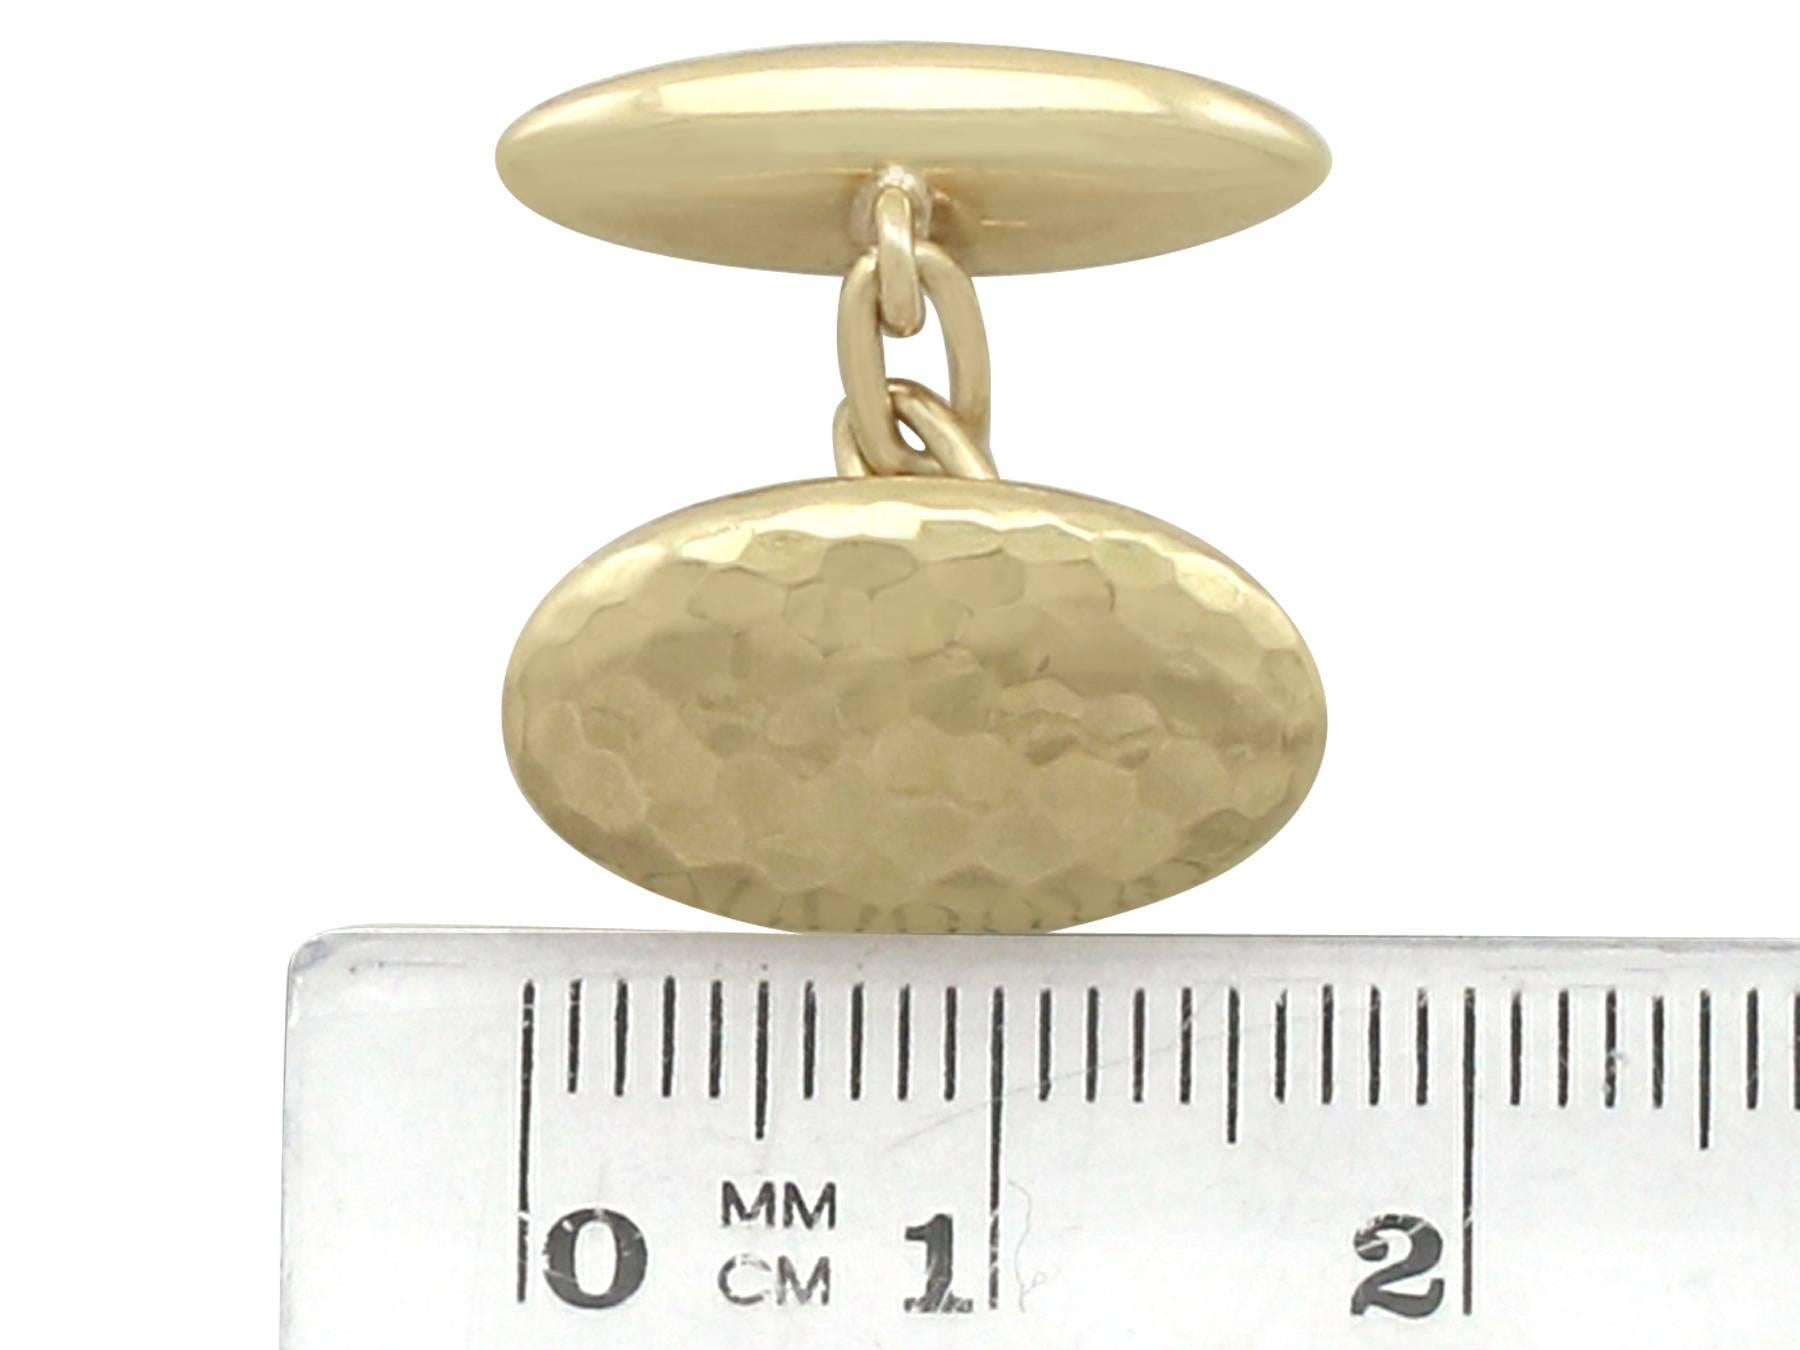 1920s Antique Cufflinks in Yellow Gold In Excellent Condition For Sale In Jesmond, Newcastle Upon Tyne